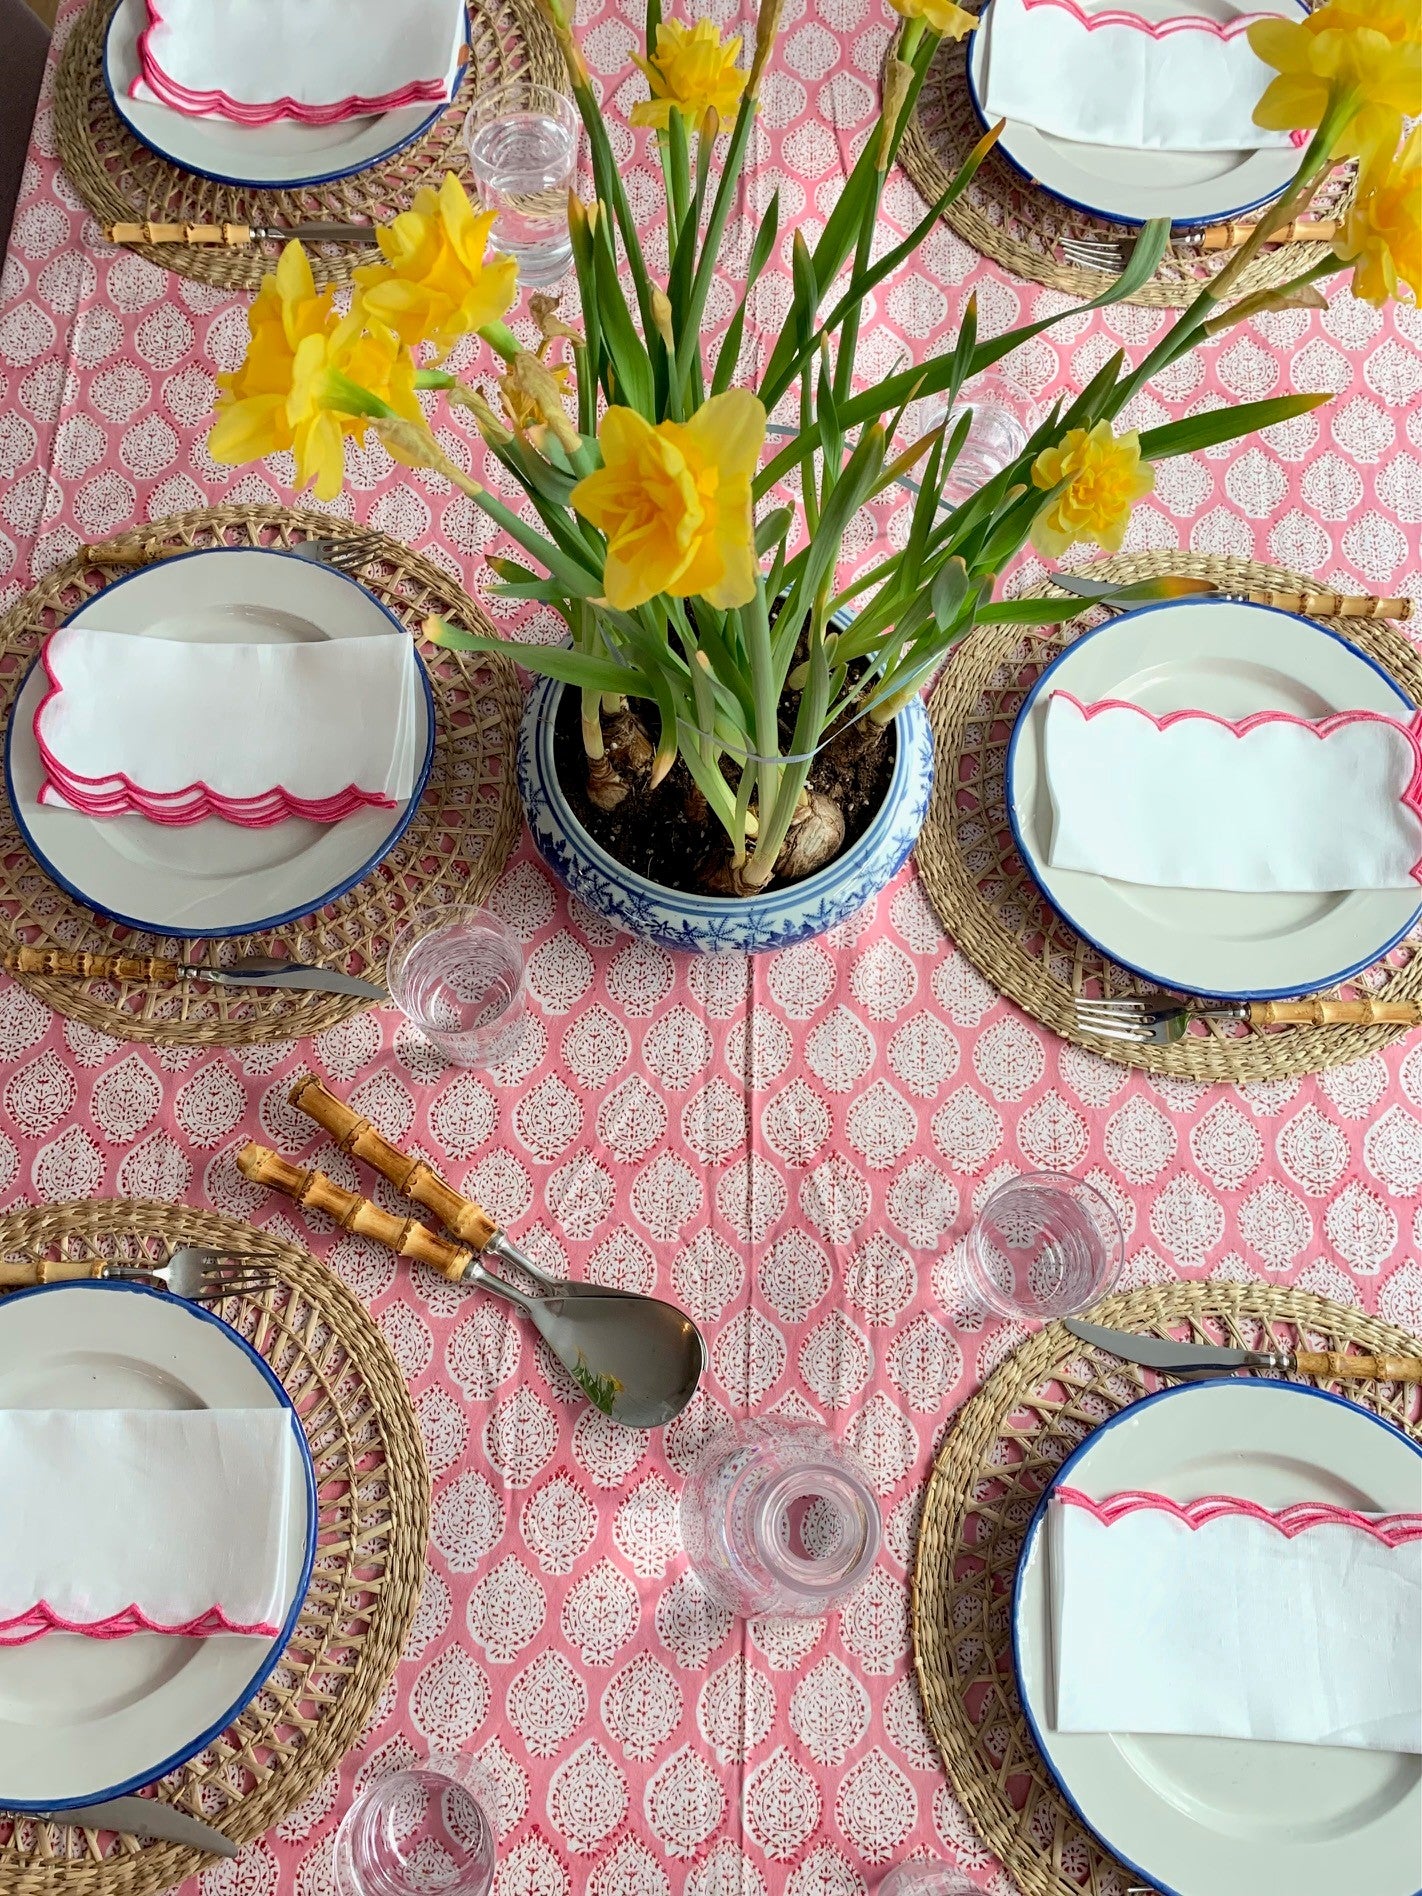 Birds eye view of a laid table with a pink block printed tablecloth and daffodils as the centre piece.